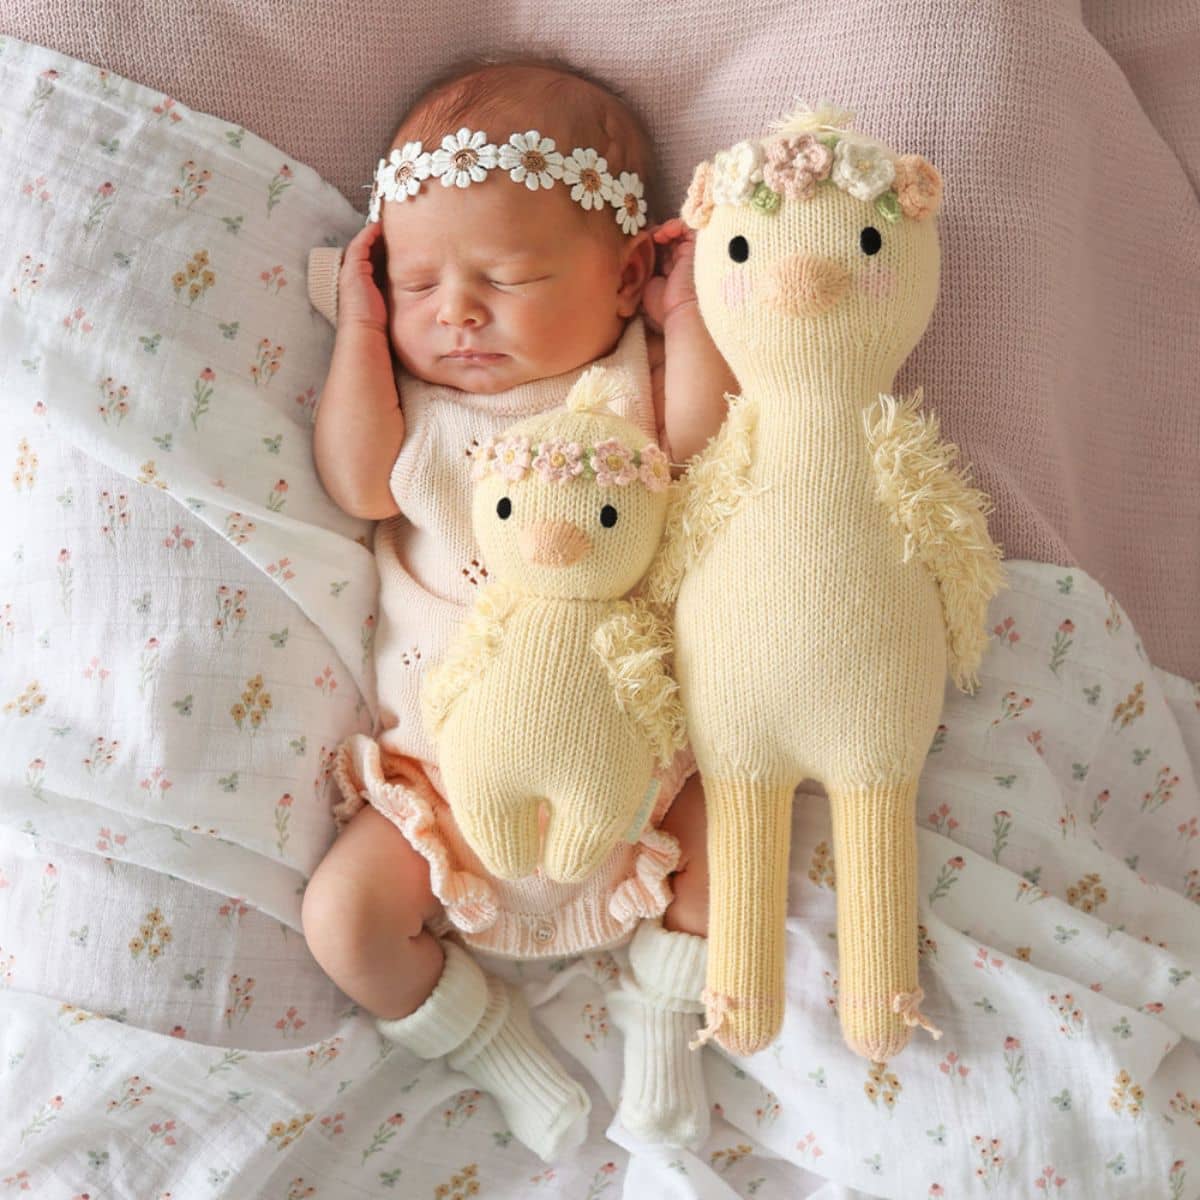 Cuddle + Kind Hand-Knit Doll - Baby Duckling (blush floral)